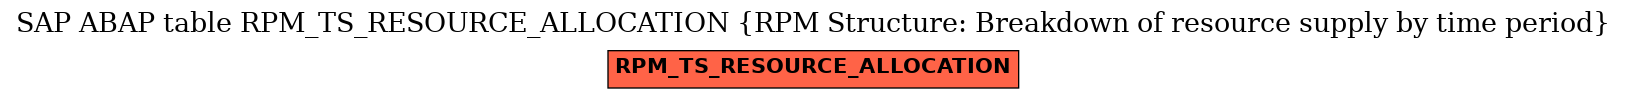 E-R Diagram for table RPM_TS_RESOURCE_ALLOCATION (RPM Structure: Breakdown of resource supply by time period)